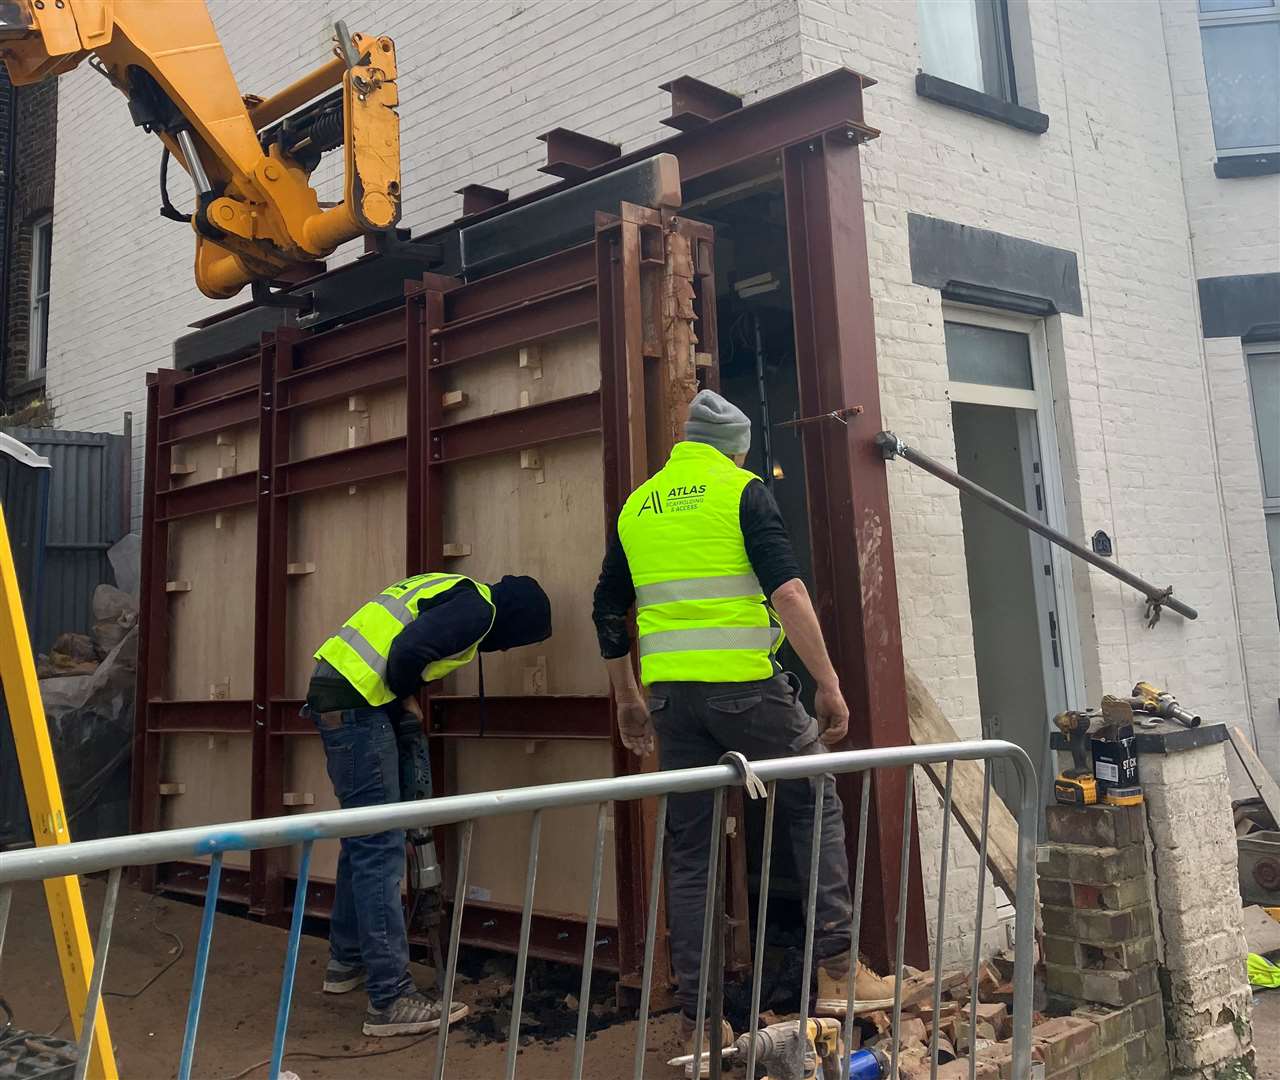 The Bansky artwork being removed from the Margate home. Picture: Bread and Butter PR